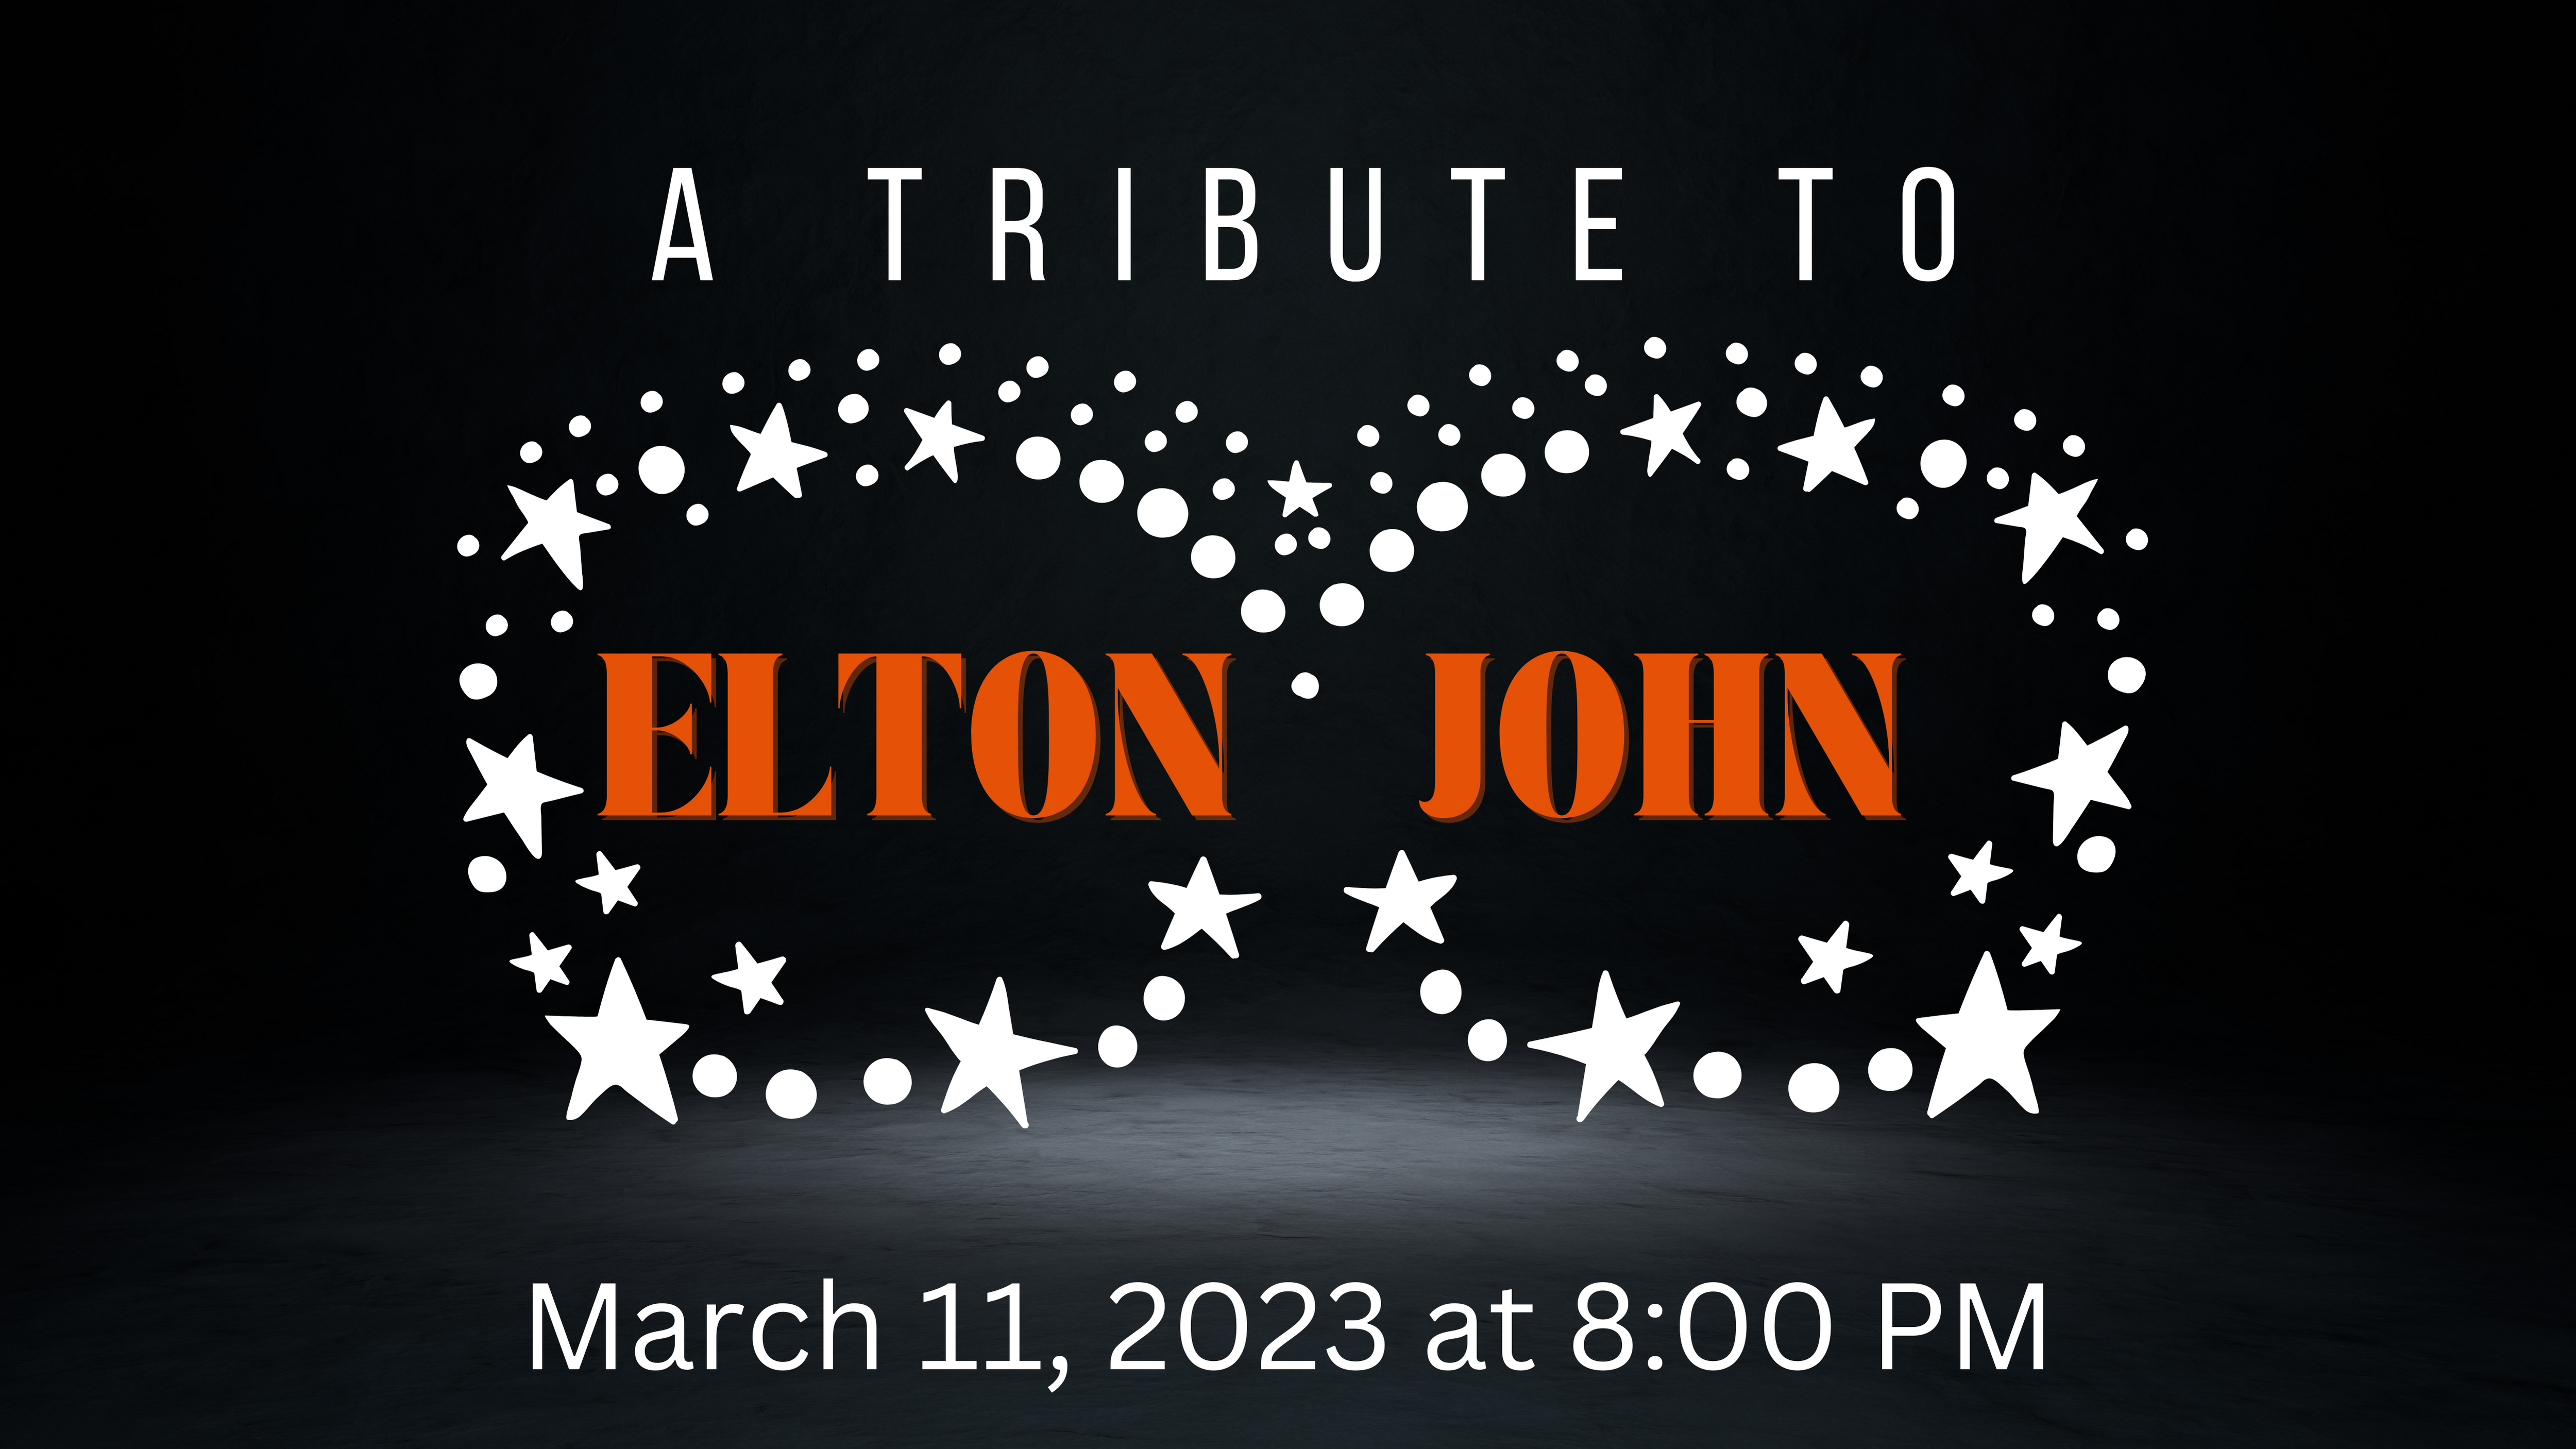 A Tribute to Elton John March 11, 2023 at 8 pm